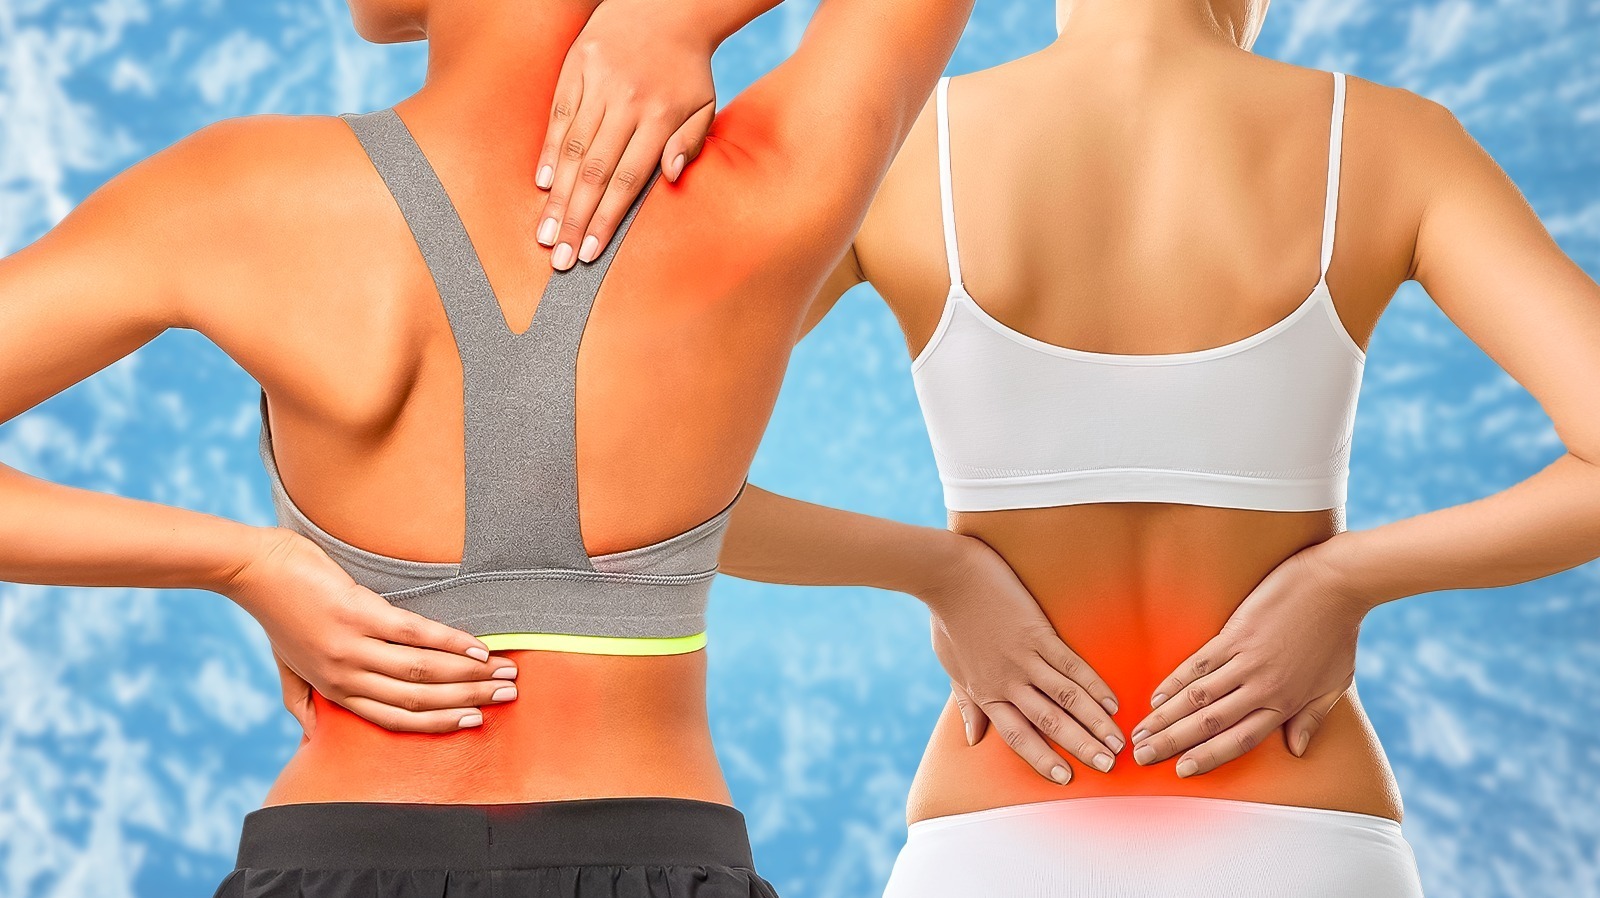 What Happens To Your Back When You Wear A Bra That Doesn't Fit